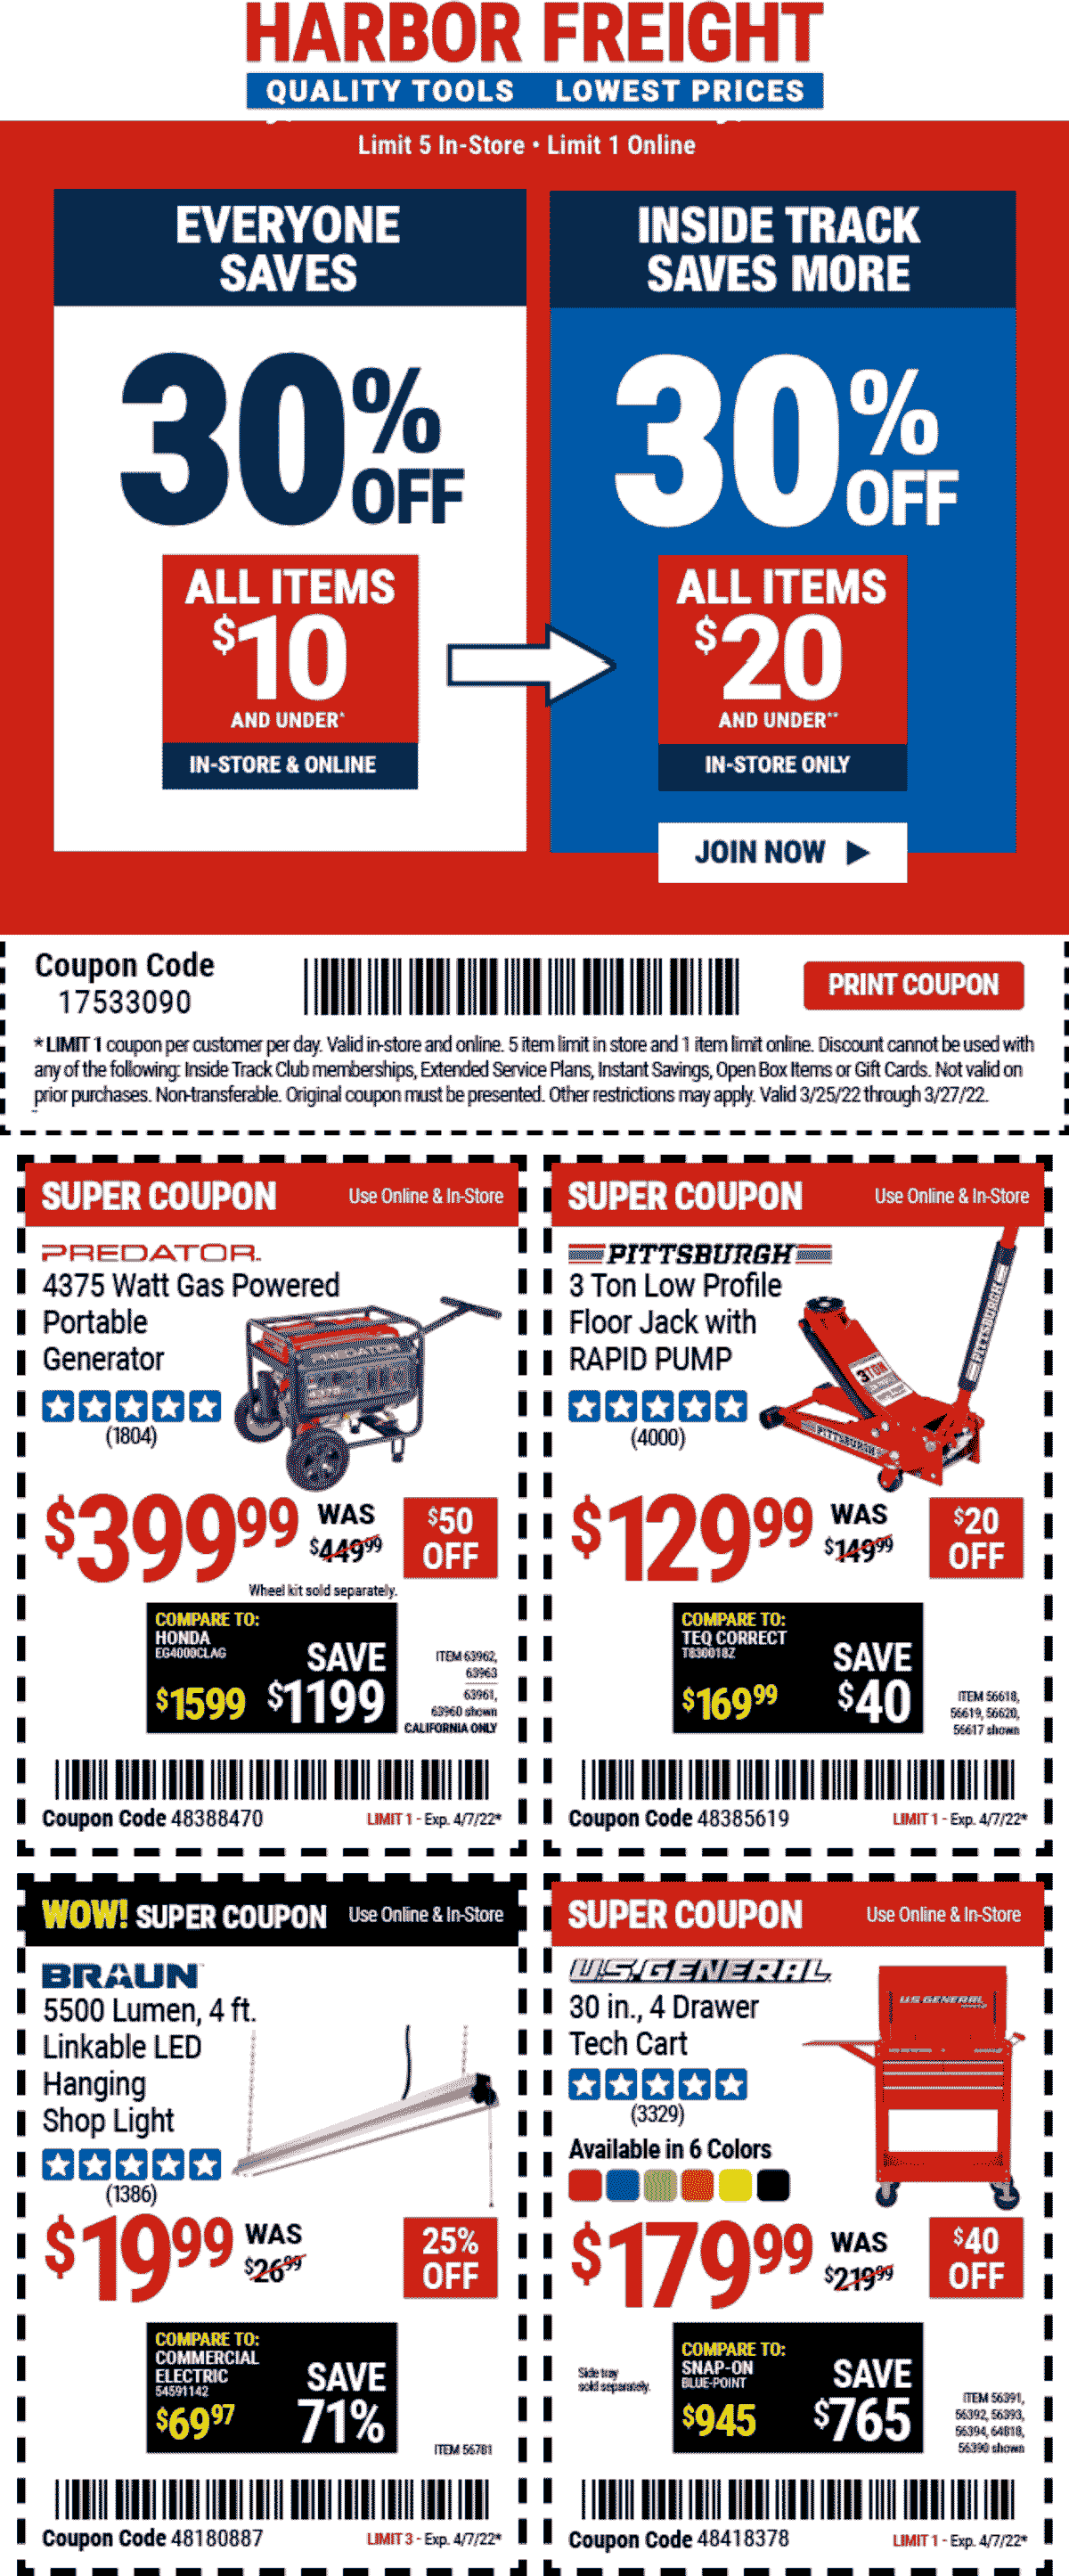 Harbor Freight Tools stores Coupon  30% off items $10-$20 or less at Harbor Freight Tools, or online via promo code 17533090 #harborfreighttools 